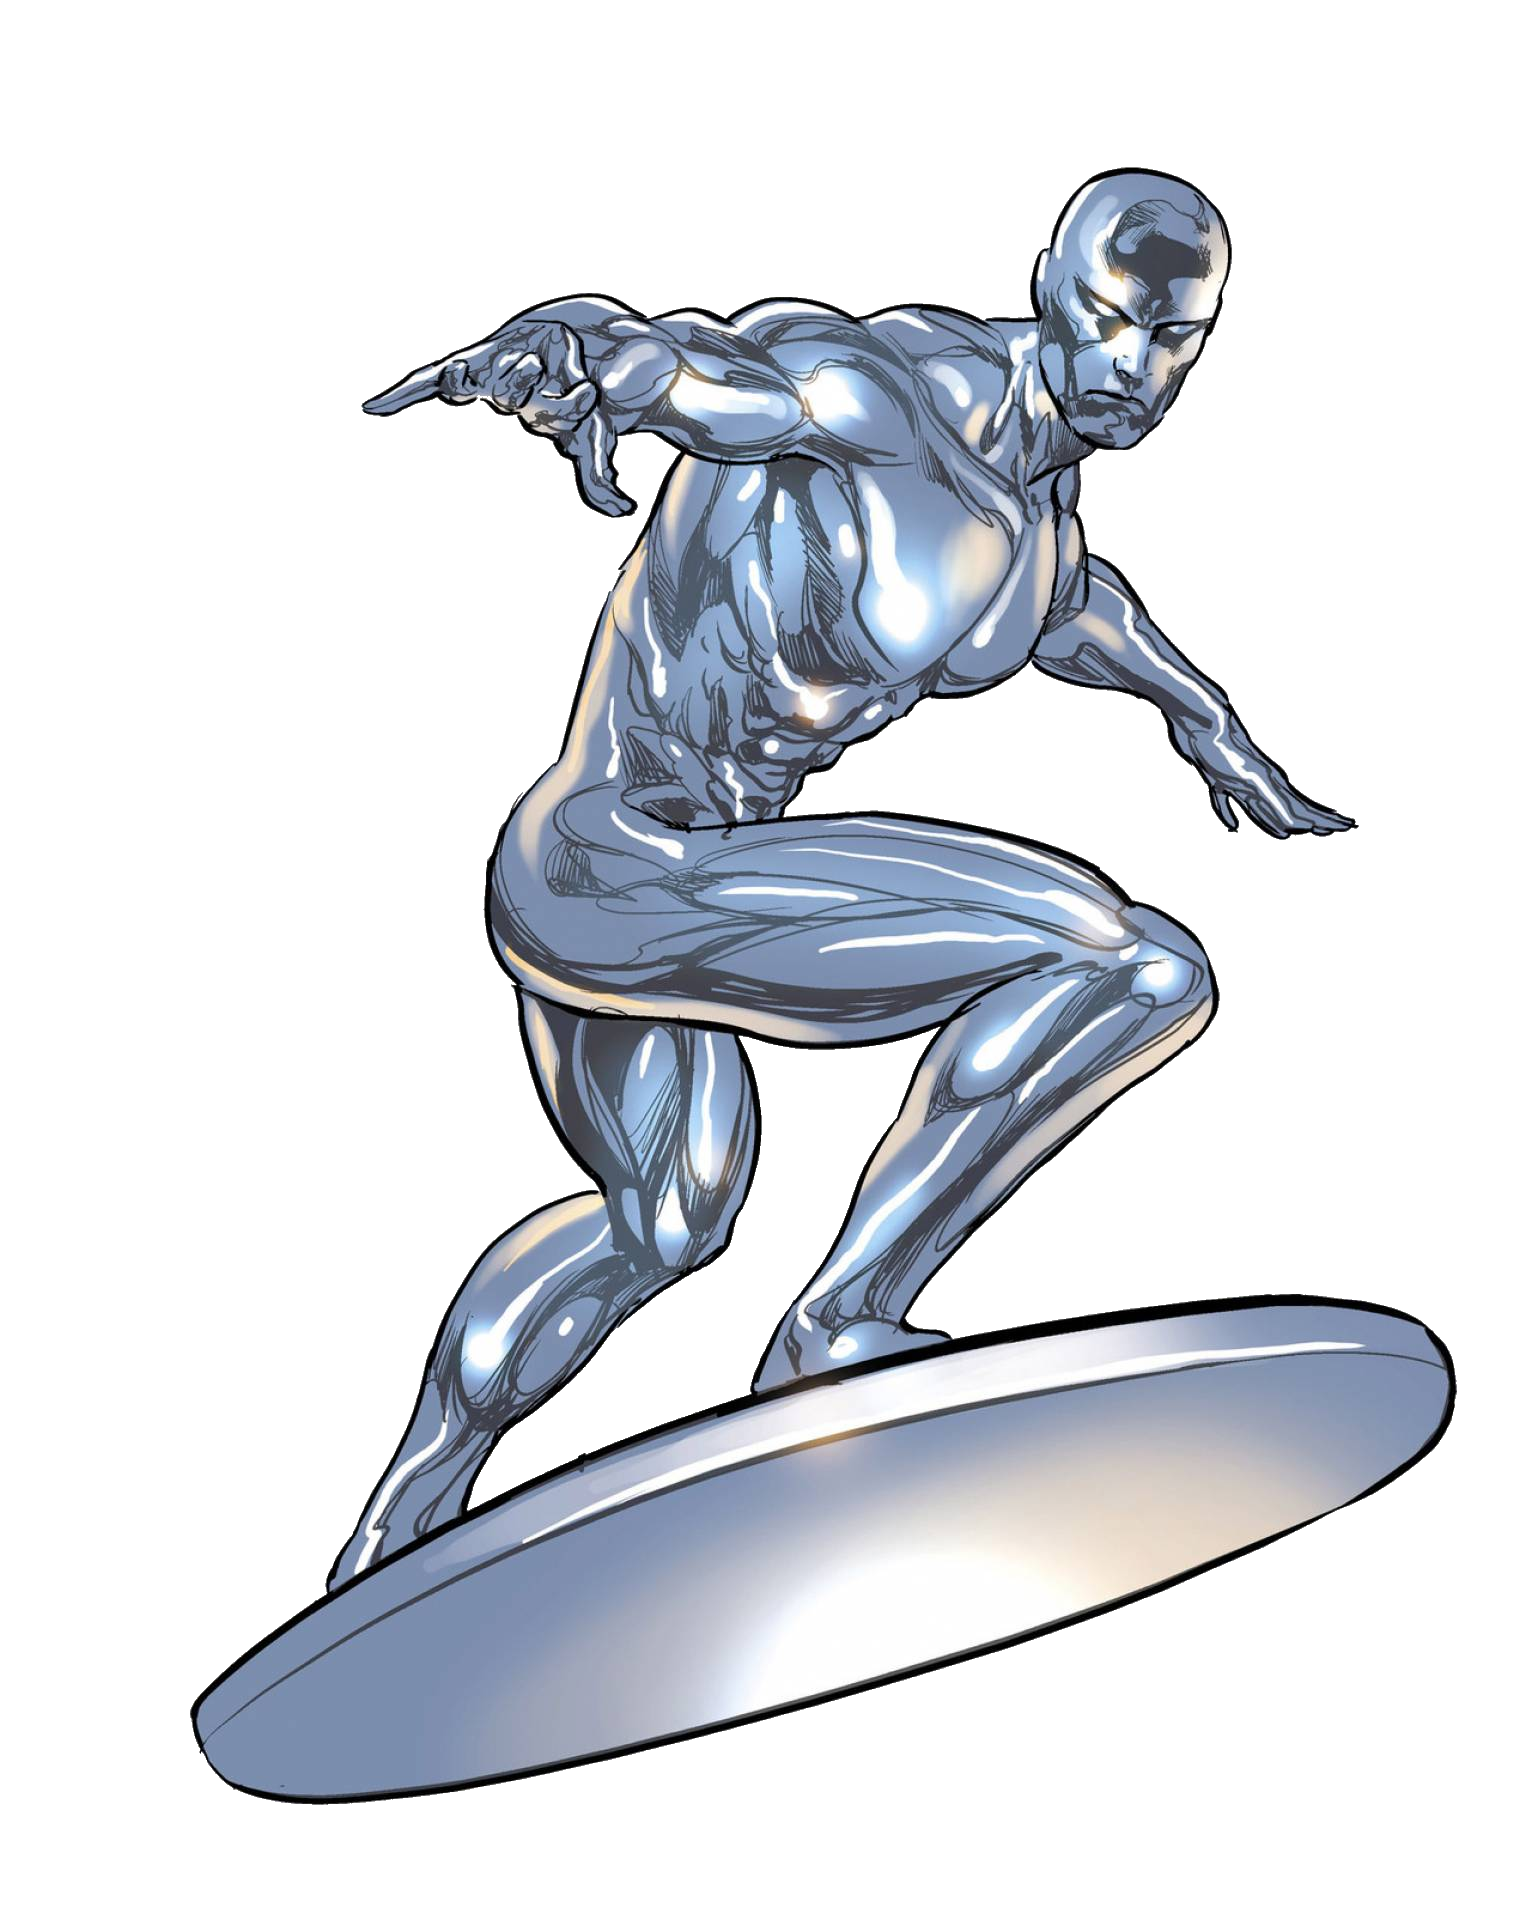 Silver Surfer Free PNG Image